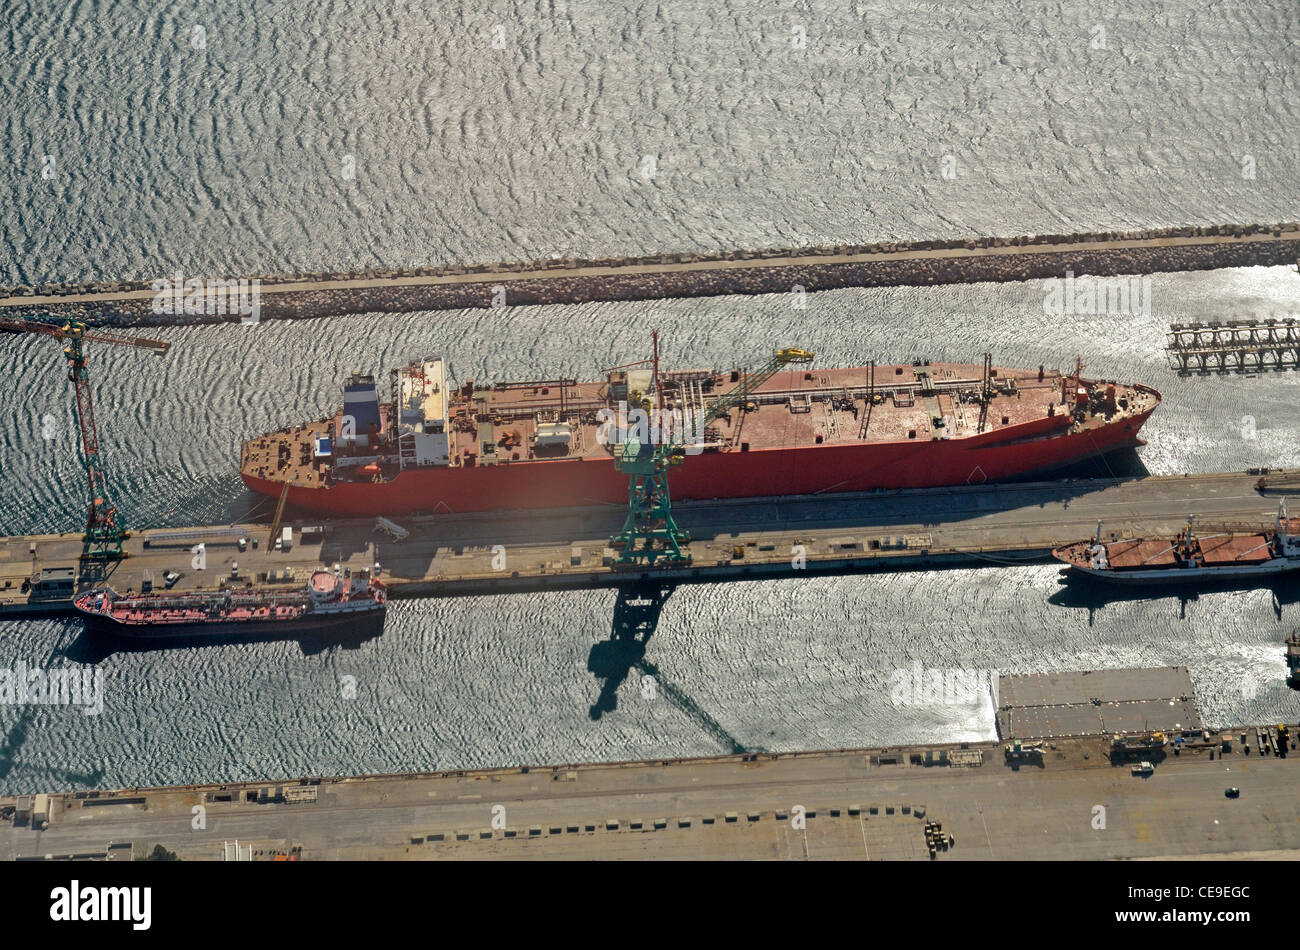 LNG (Liquefied natural gas) tanker at harbour, aerial view, Marseille, France Stock Photo